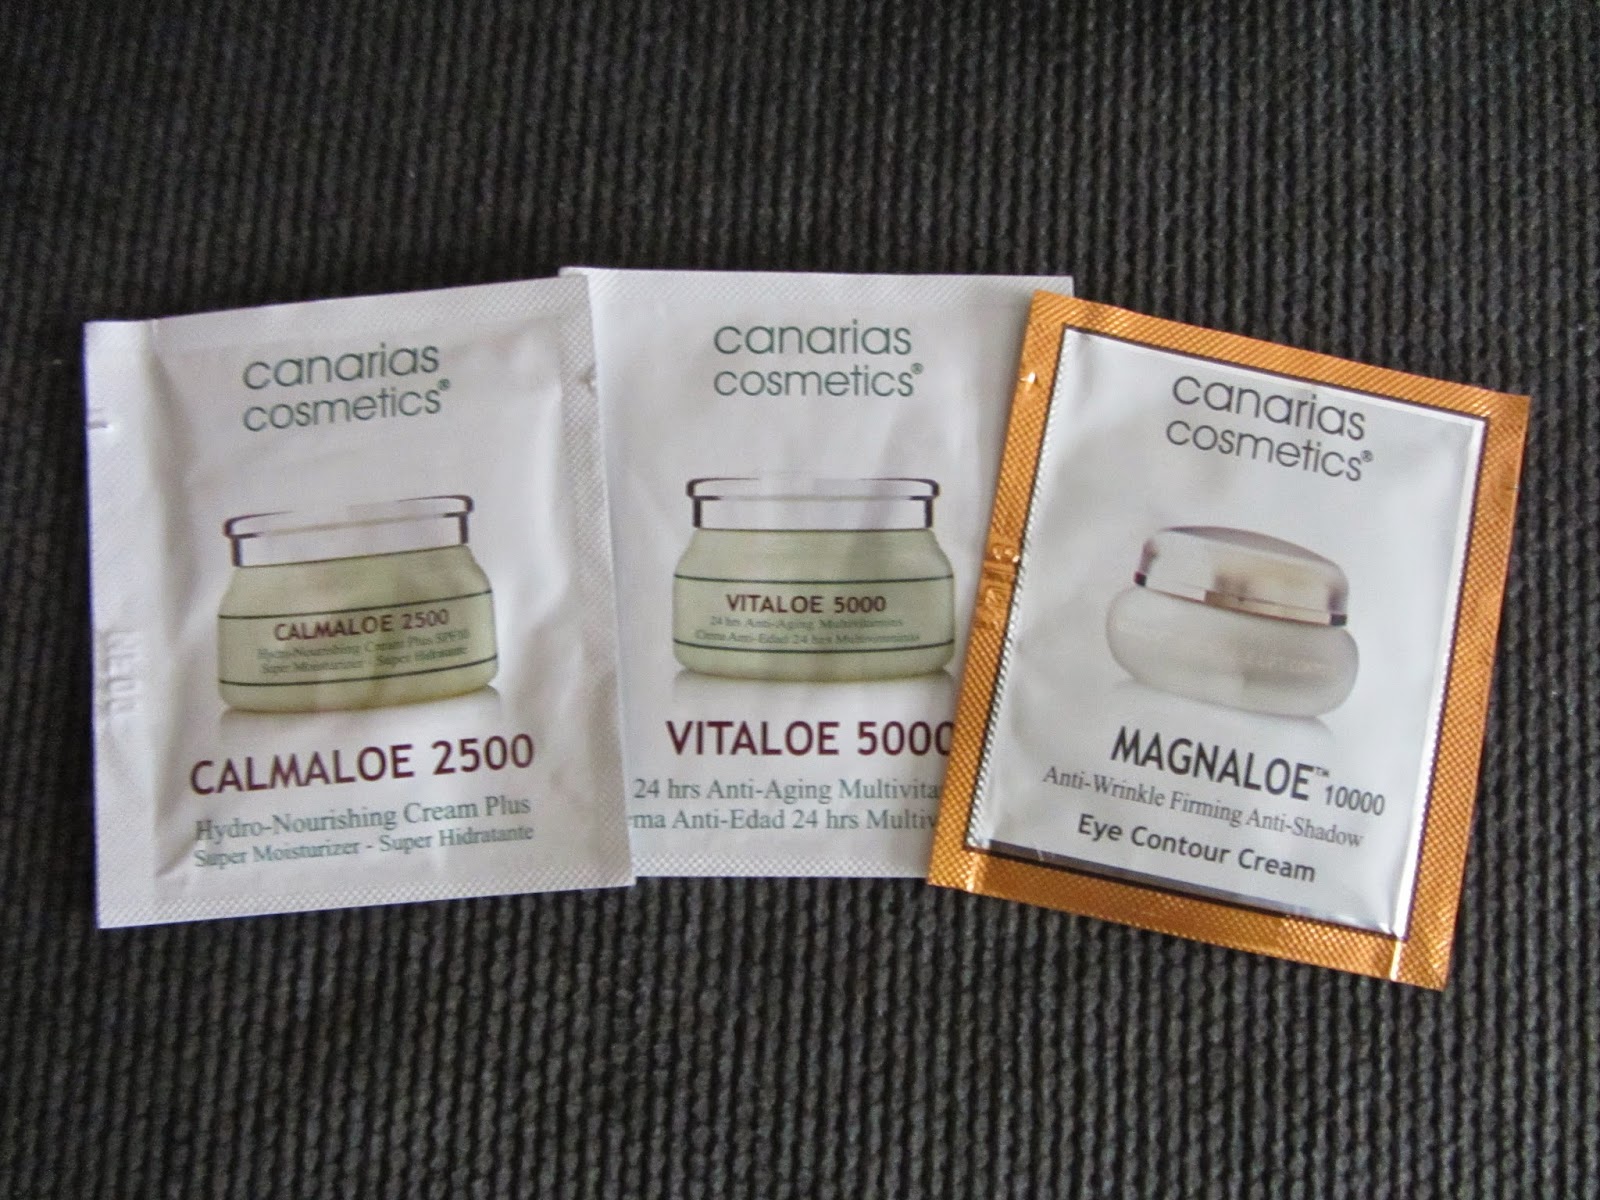 2100 and COSMETICS CANARIAS cosmetics IN Beauty, trends: SHOPPER HYDRALOE de THE CITY.